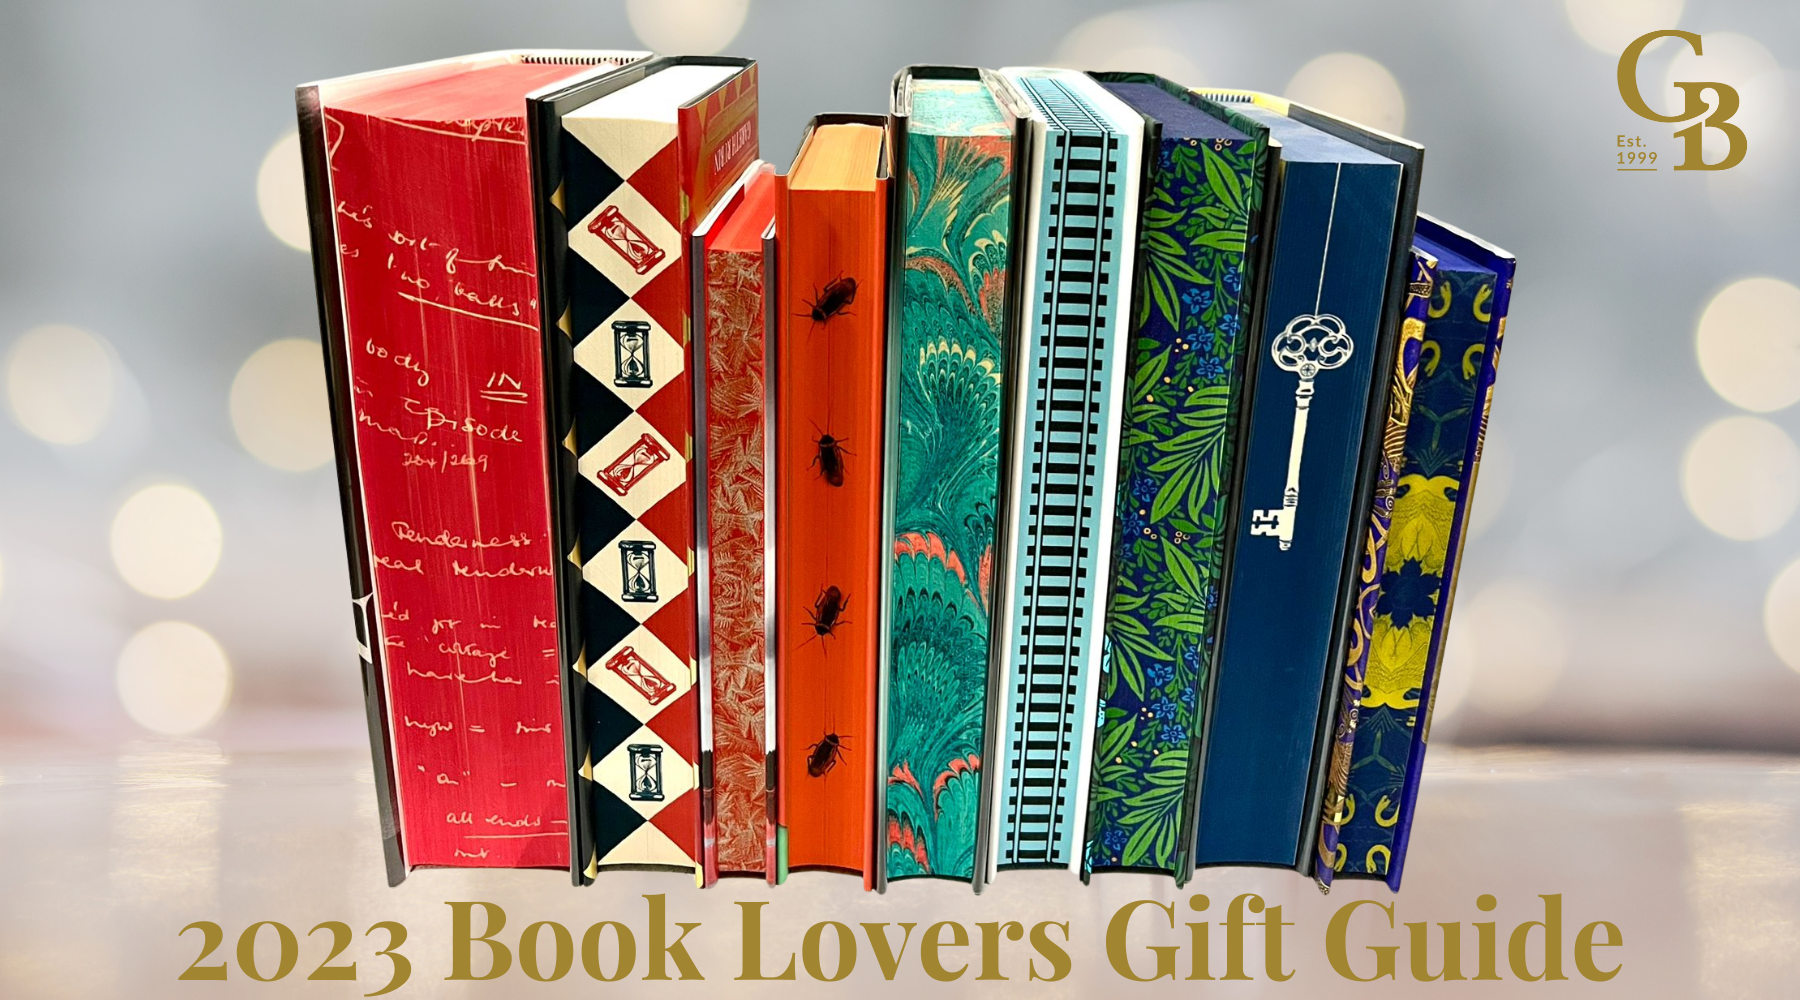 The best gifts for book lovers - BBC Science Focus Magazine